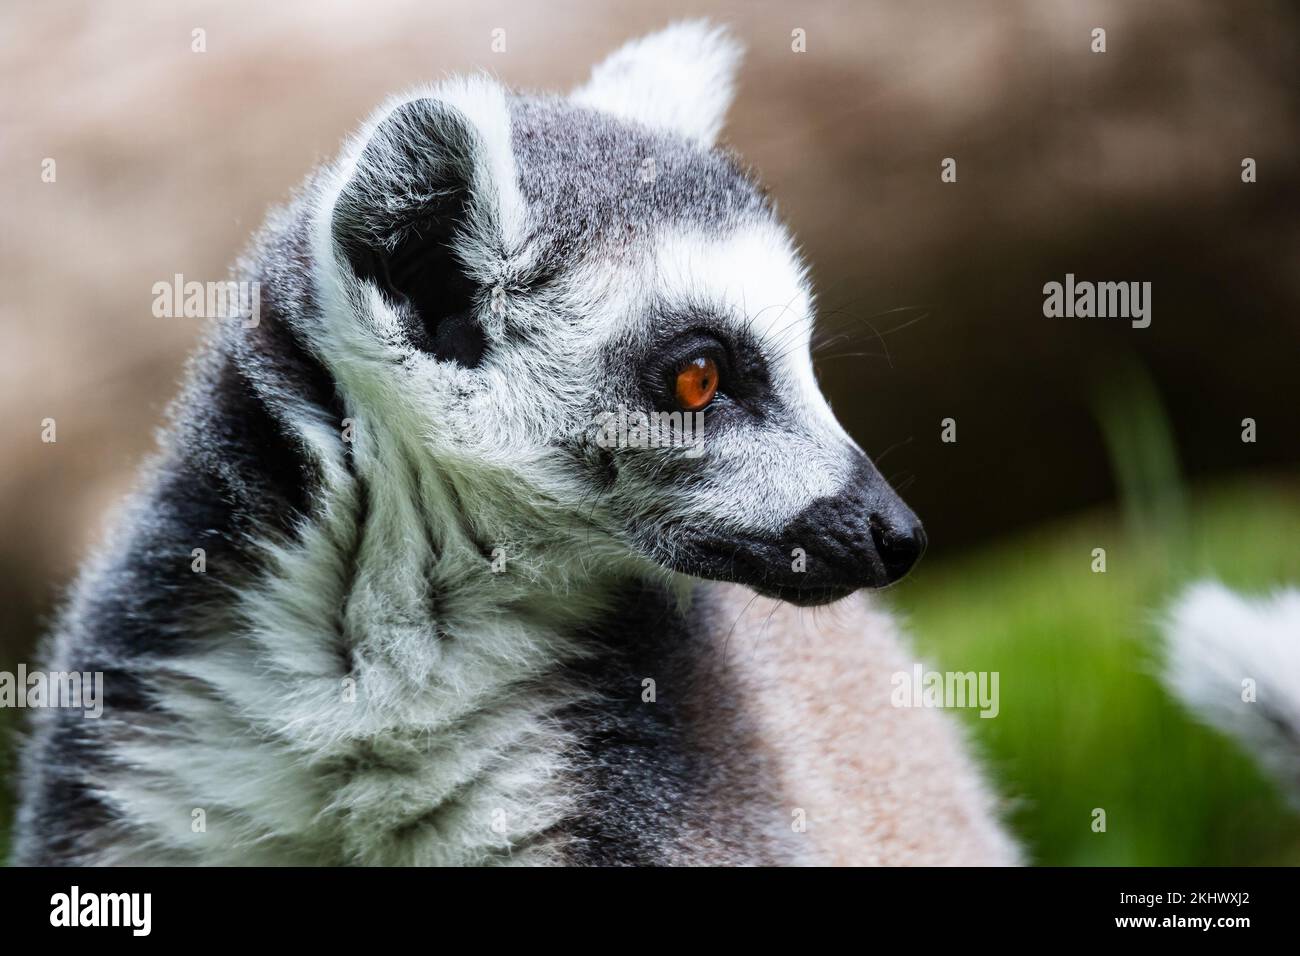 Ring-tailed lemur monkey. Mammal and mammals. Land world and fauna. Wildlife and zoology. Nature and animal photography. Stock Photo